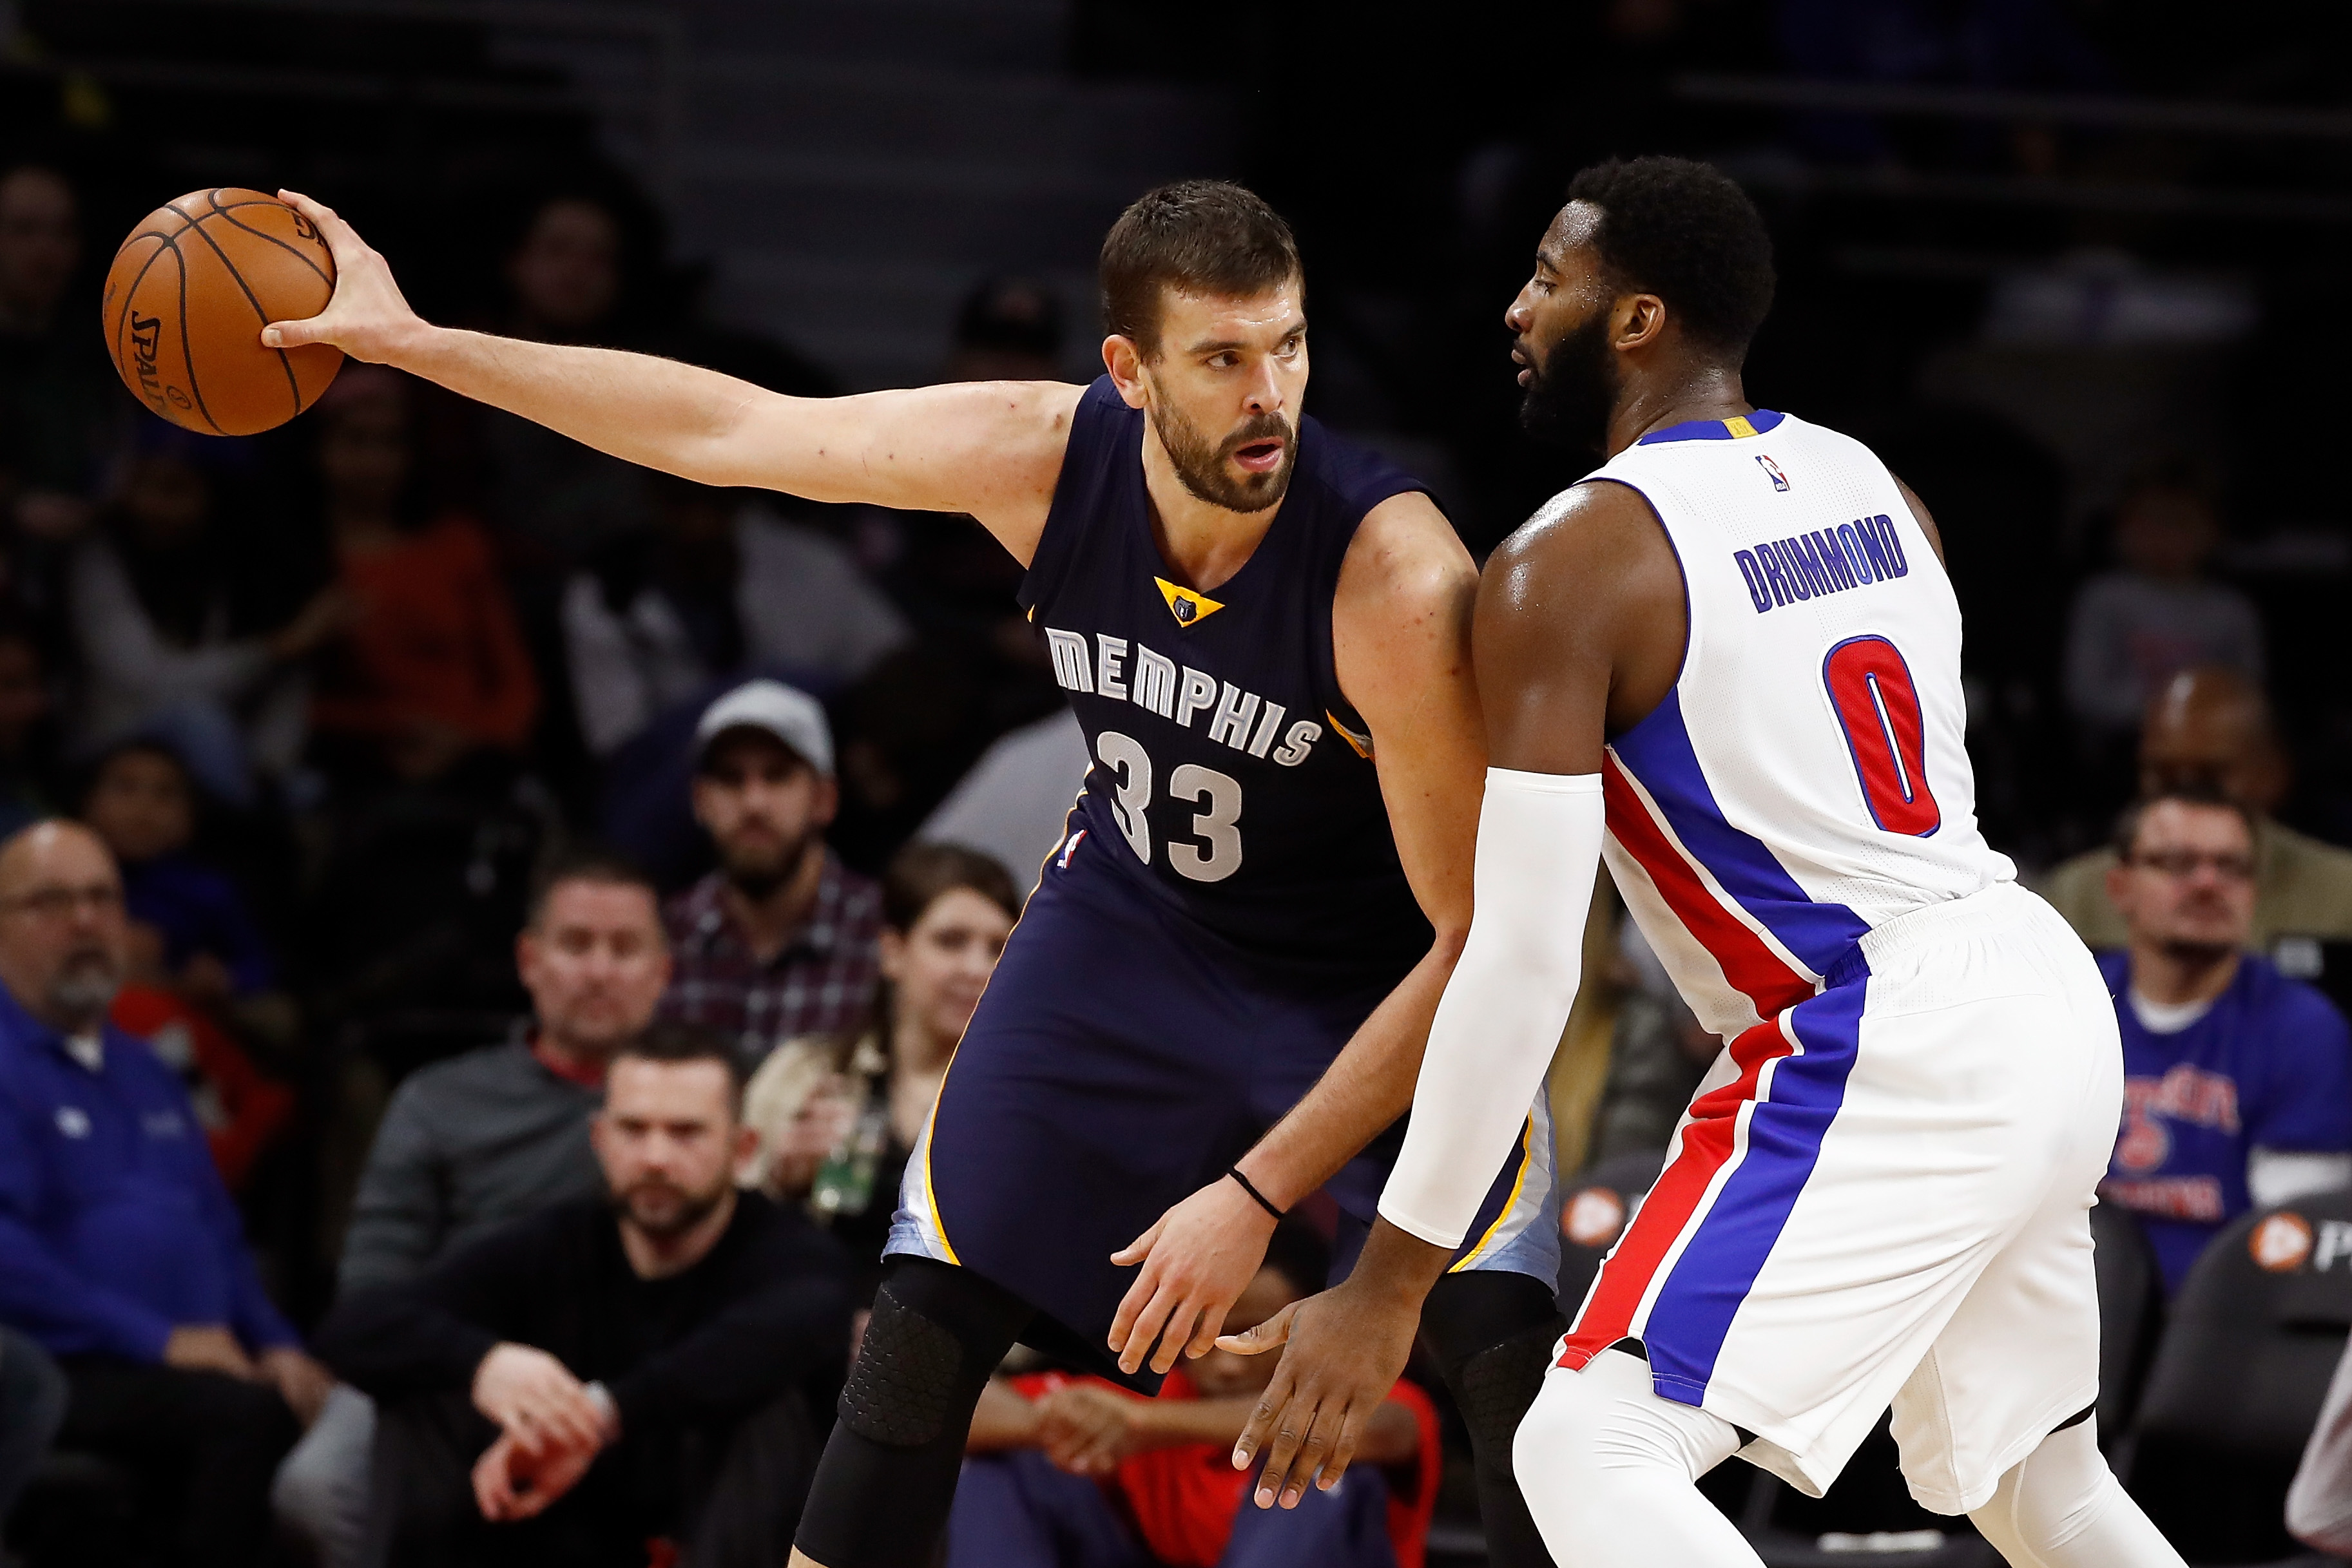 AUBURN HILLS, MI - DECEMBER 21: Marc Gasol #33 of the Memphis Grizzlies looks to make a move against Andre Drummond #0 of the Detroit Pistons during the second half at the Palace of Auburn Hills on December 21, 2016 in Auburn Hills, Michigan. Memphis won the game 98.86. NOTE TO USER: User expressly acknowledges and agrees that, by downloading and or using this photograph, User is consenting to the terms and conditions of the Getty Images License Agreement.   Gregory Shamus/Getty Images/AFP